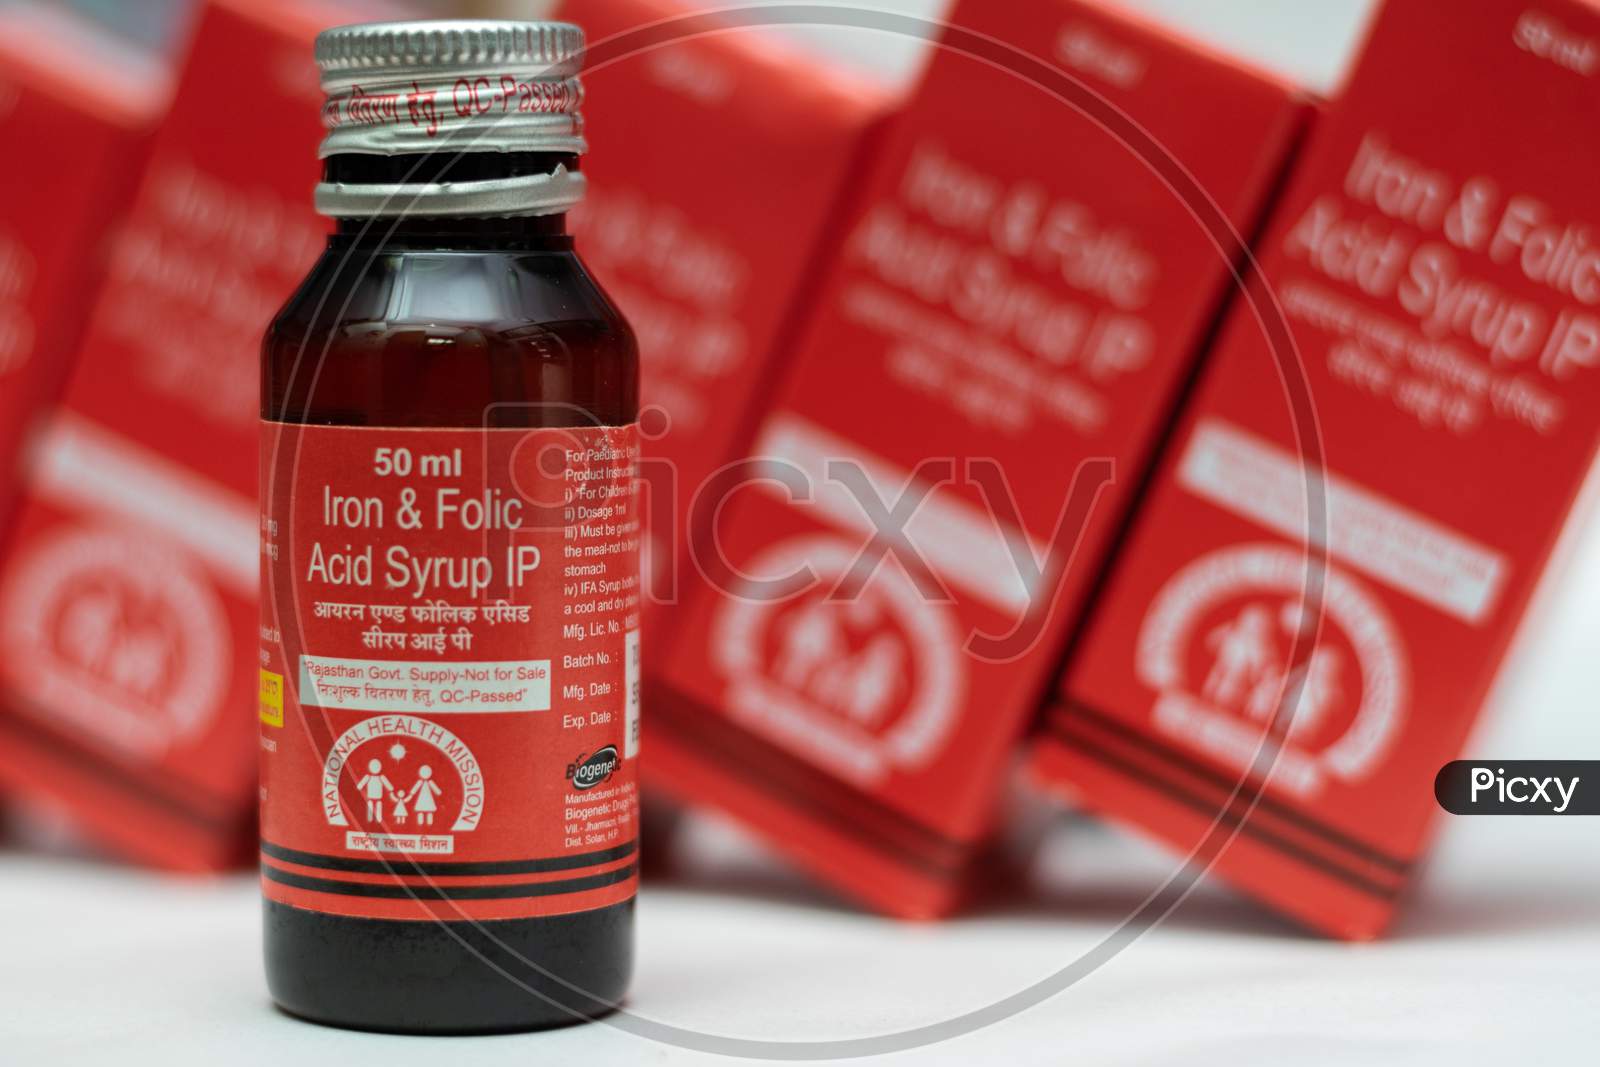 Iron and folic acid syrups provided free by government To reduce the prevalence and severity of anaemia in children (5 months-5 years)